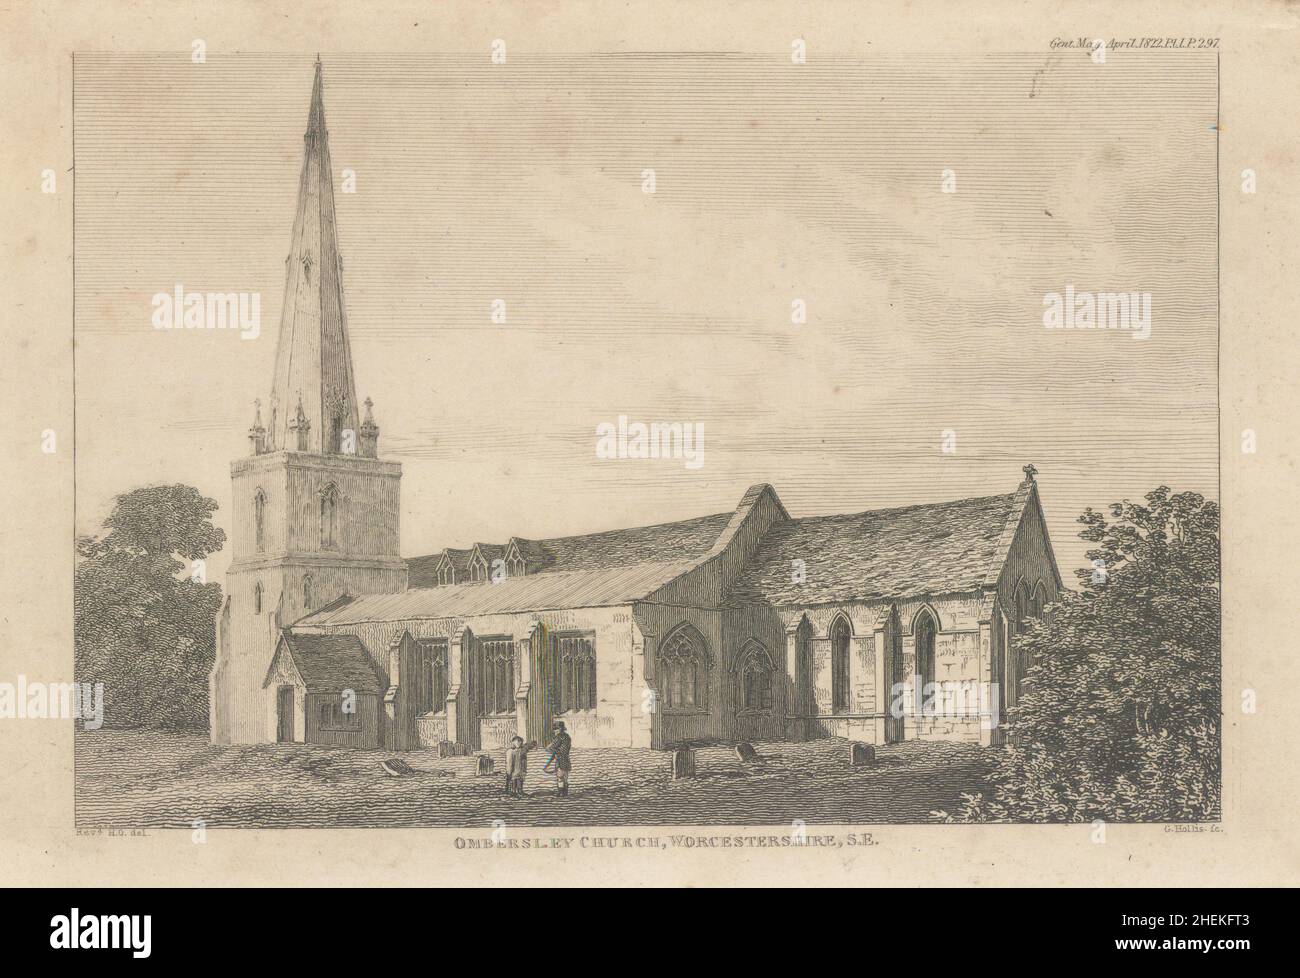 South east view of St Andrew's Church in Ombersley, Worcestershire 1822 print Stock Photo